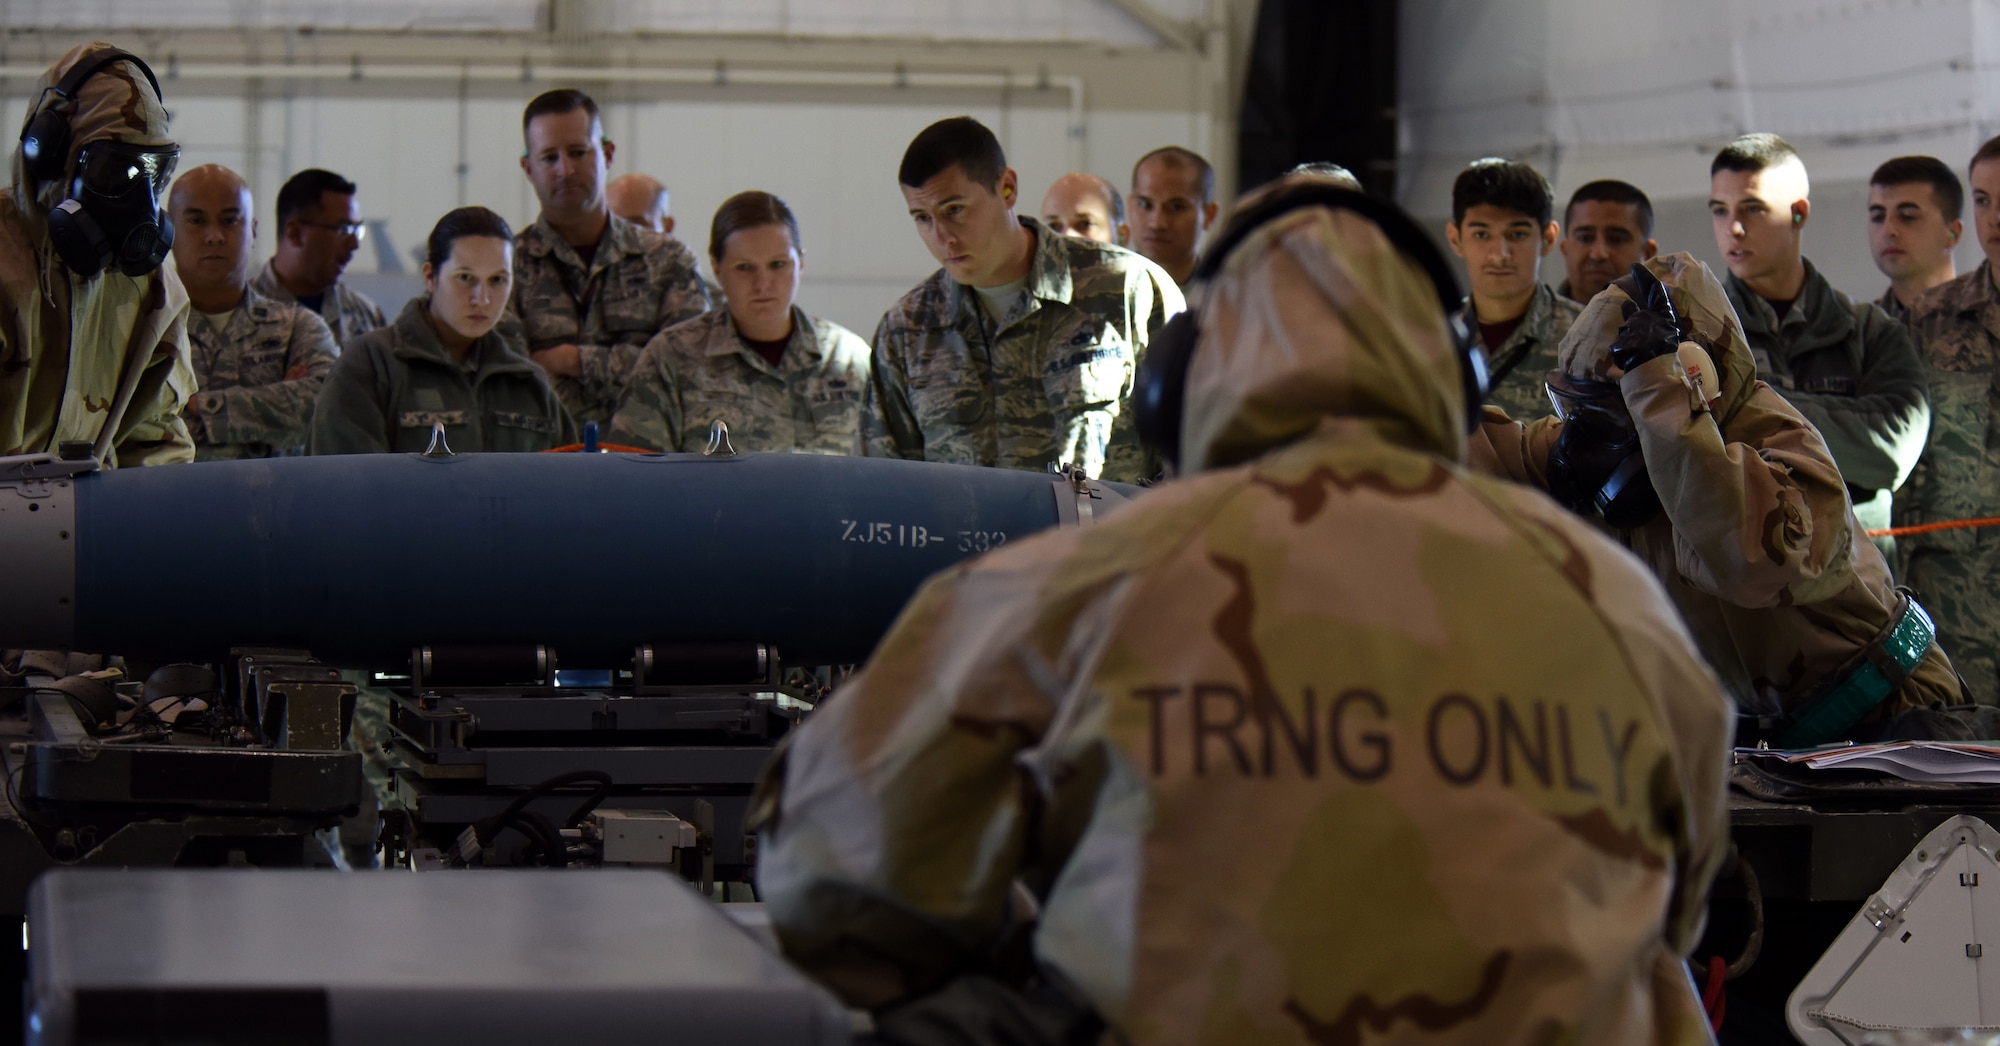 Airmen assigned to the 432nd Aircraft Maintenance Squadron Reaper Aircraft Maintenance Unit coordinate to load a GBU-38 Joint Direct Attack Munition during a weapons load competition Dec. 8, 2017, at Creech Air Force Base, Nev. Weapons load competitions help build camaraderie and highlight the load crew’s capabilities to load munitions safely. (U.S. Air Force photo by Airman 1st Class Haley Stevens)